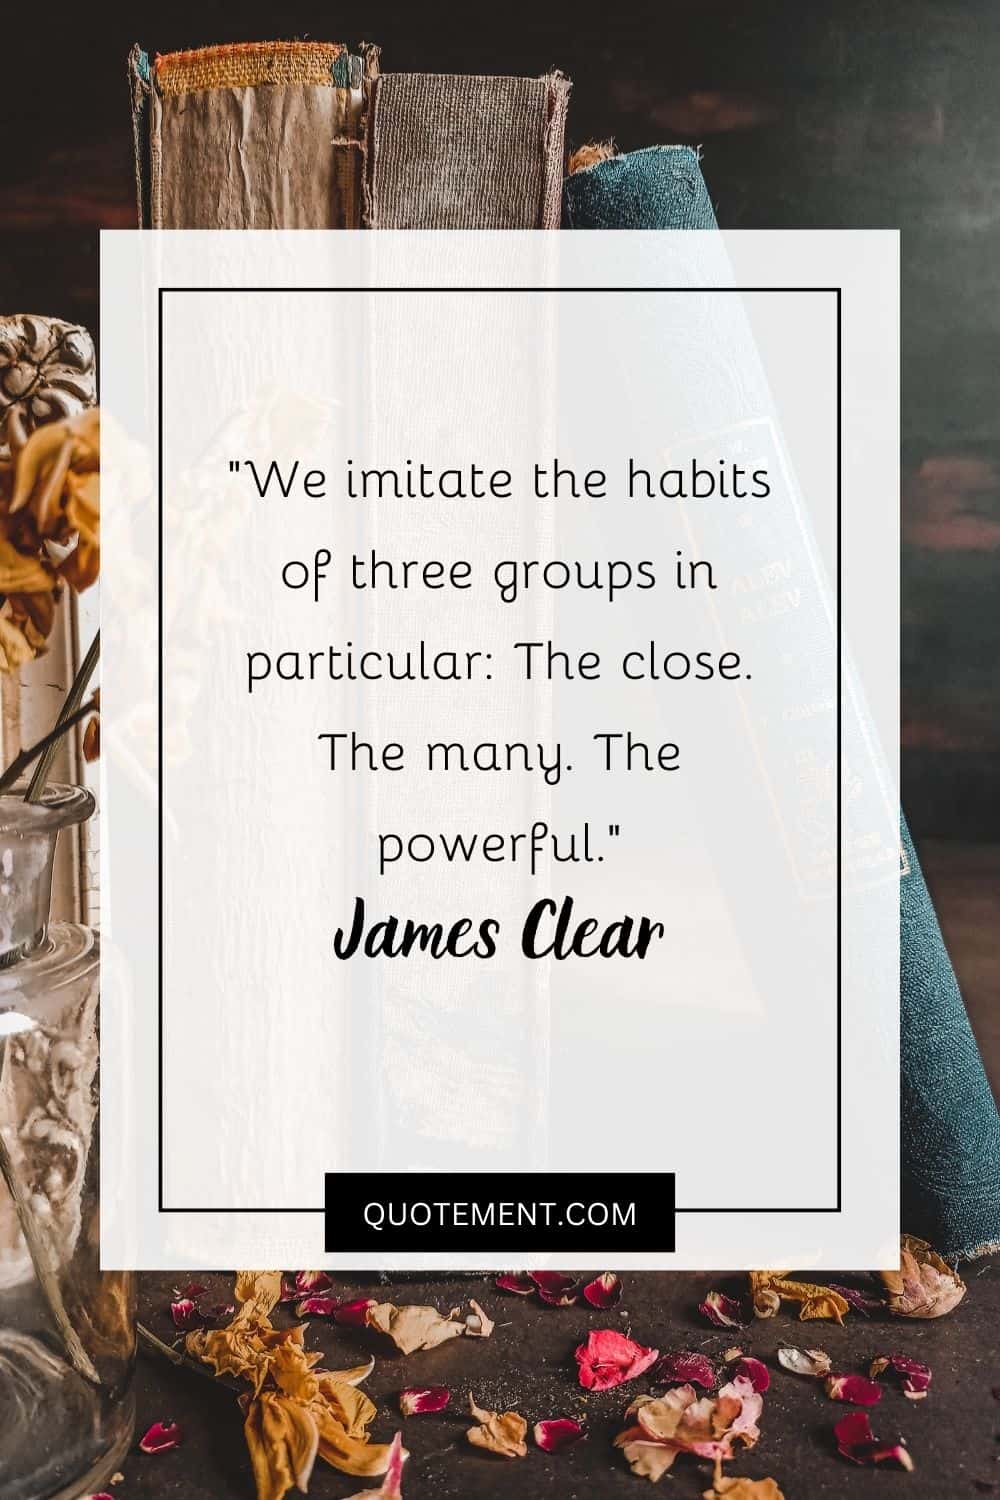 We imitate the habits of three groups in particular The close. The many. The powerful